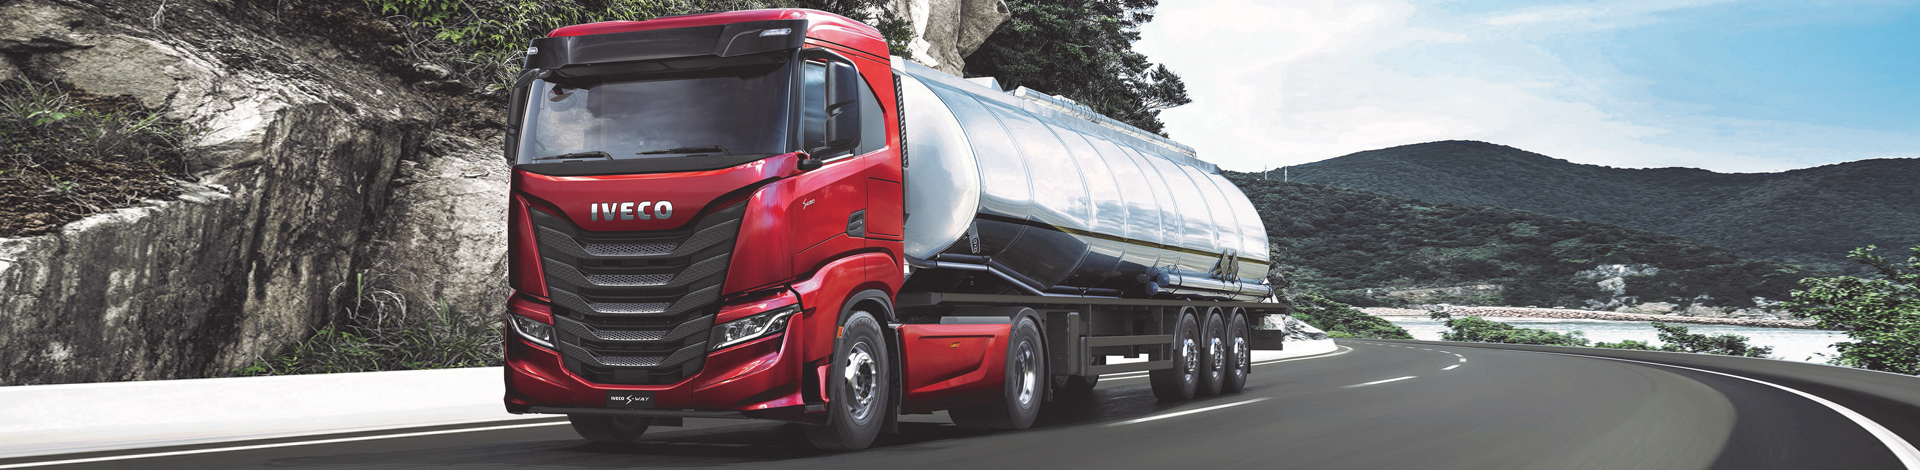 Red Iveco S Way tanker truck